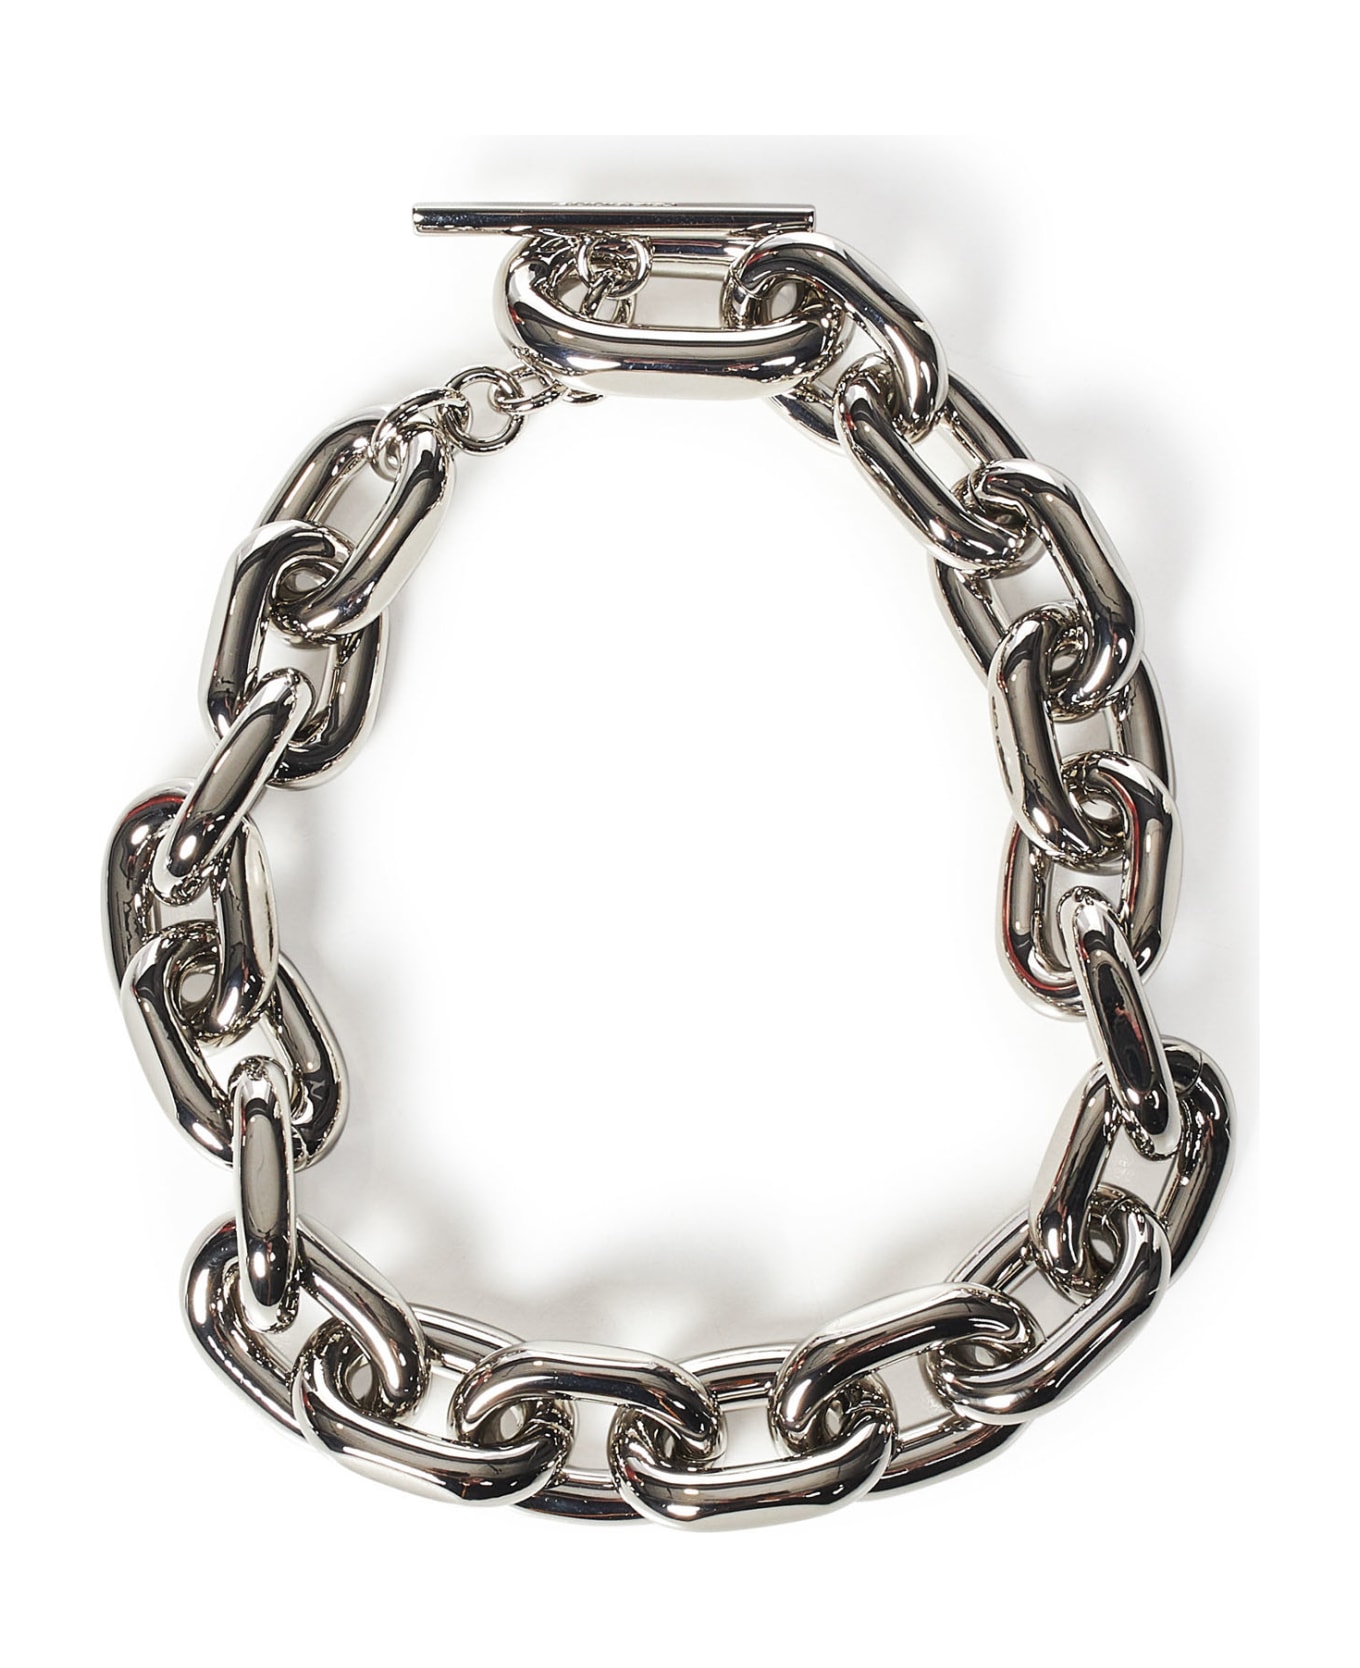 Paco Rabanne Xl Link Necklace - Silver ネックレス